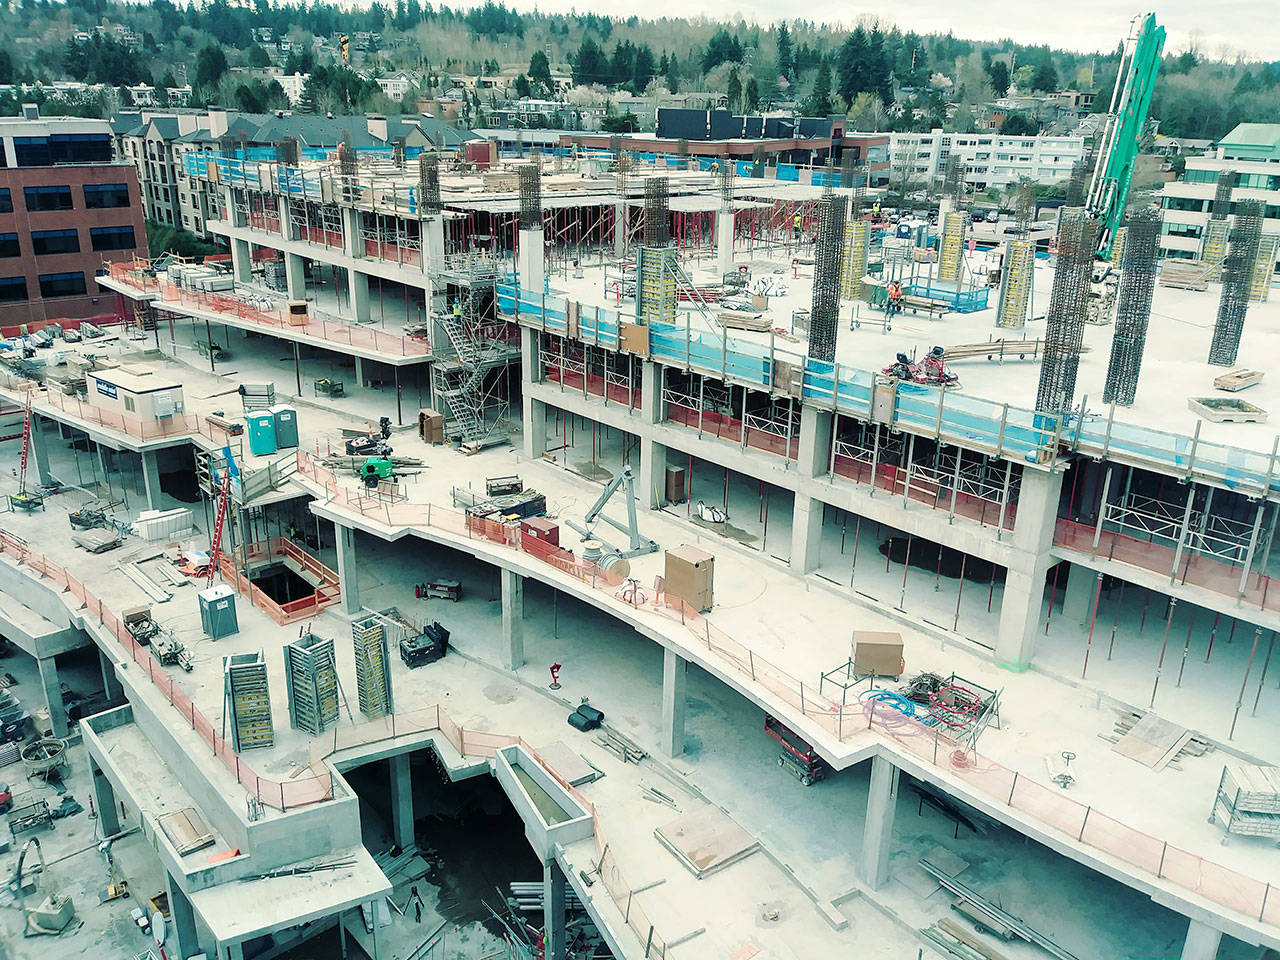 The Kirkland Urban development as seen from the top floor of one of the buildings during construction in 2016. The first building in the development opened later that year in October. Aaron Kunkler/staff photo